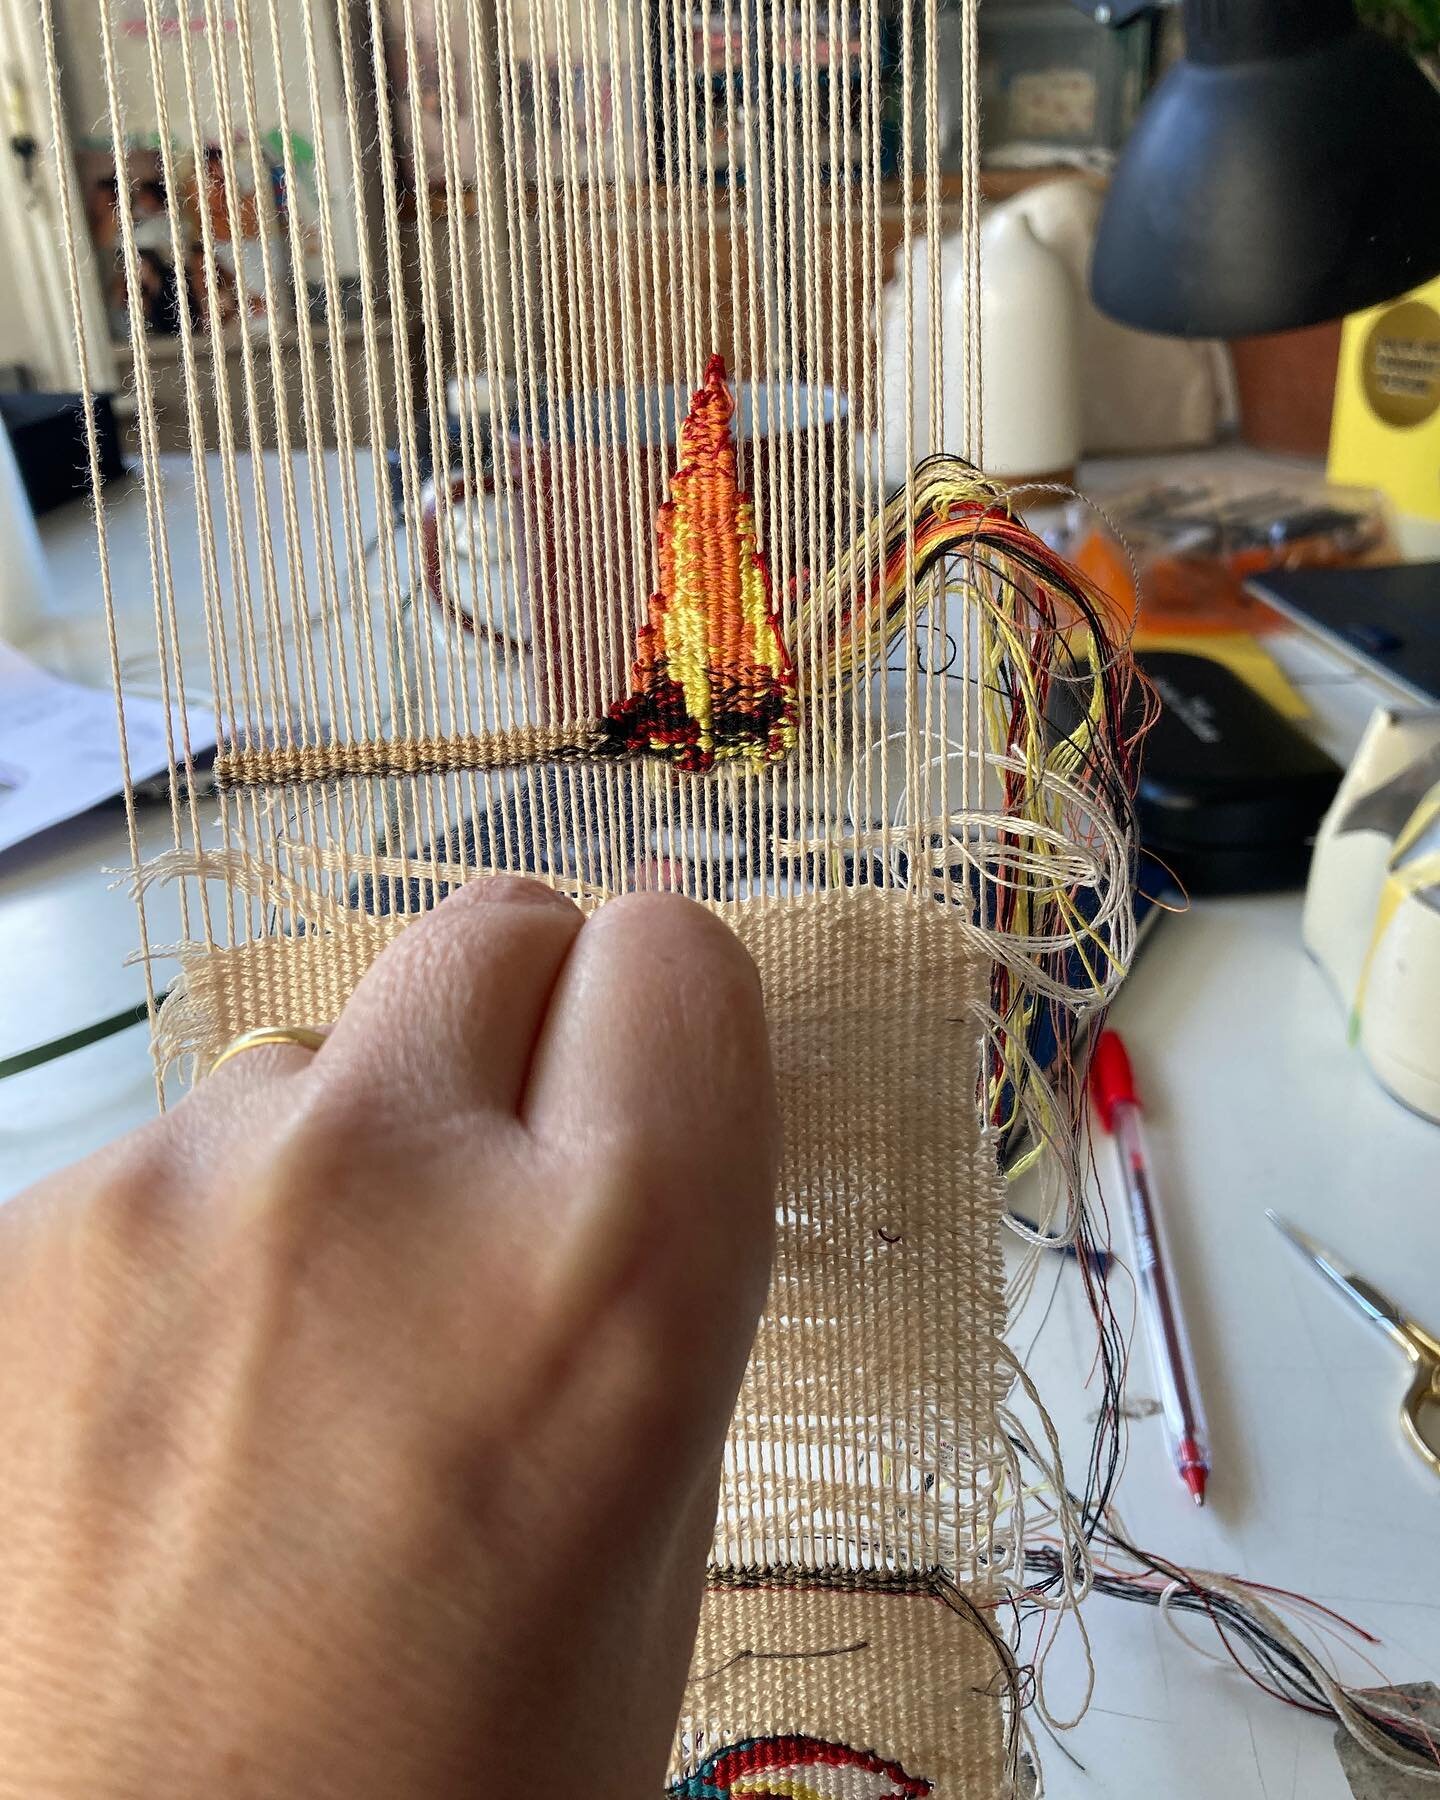 Weaving then unweaving. Lit matches, warp intact. More to come &hellip;. #tapestry #textiles #handweaving #arttextile #burningdownthehouse #tapestryinstallation